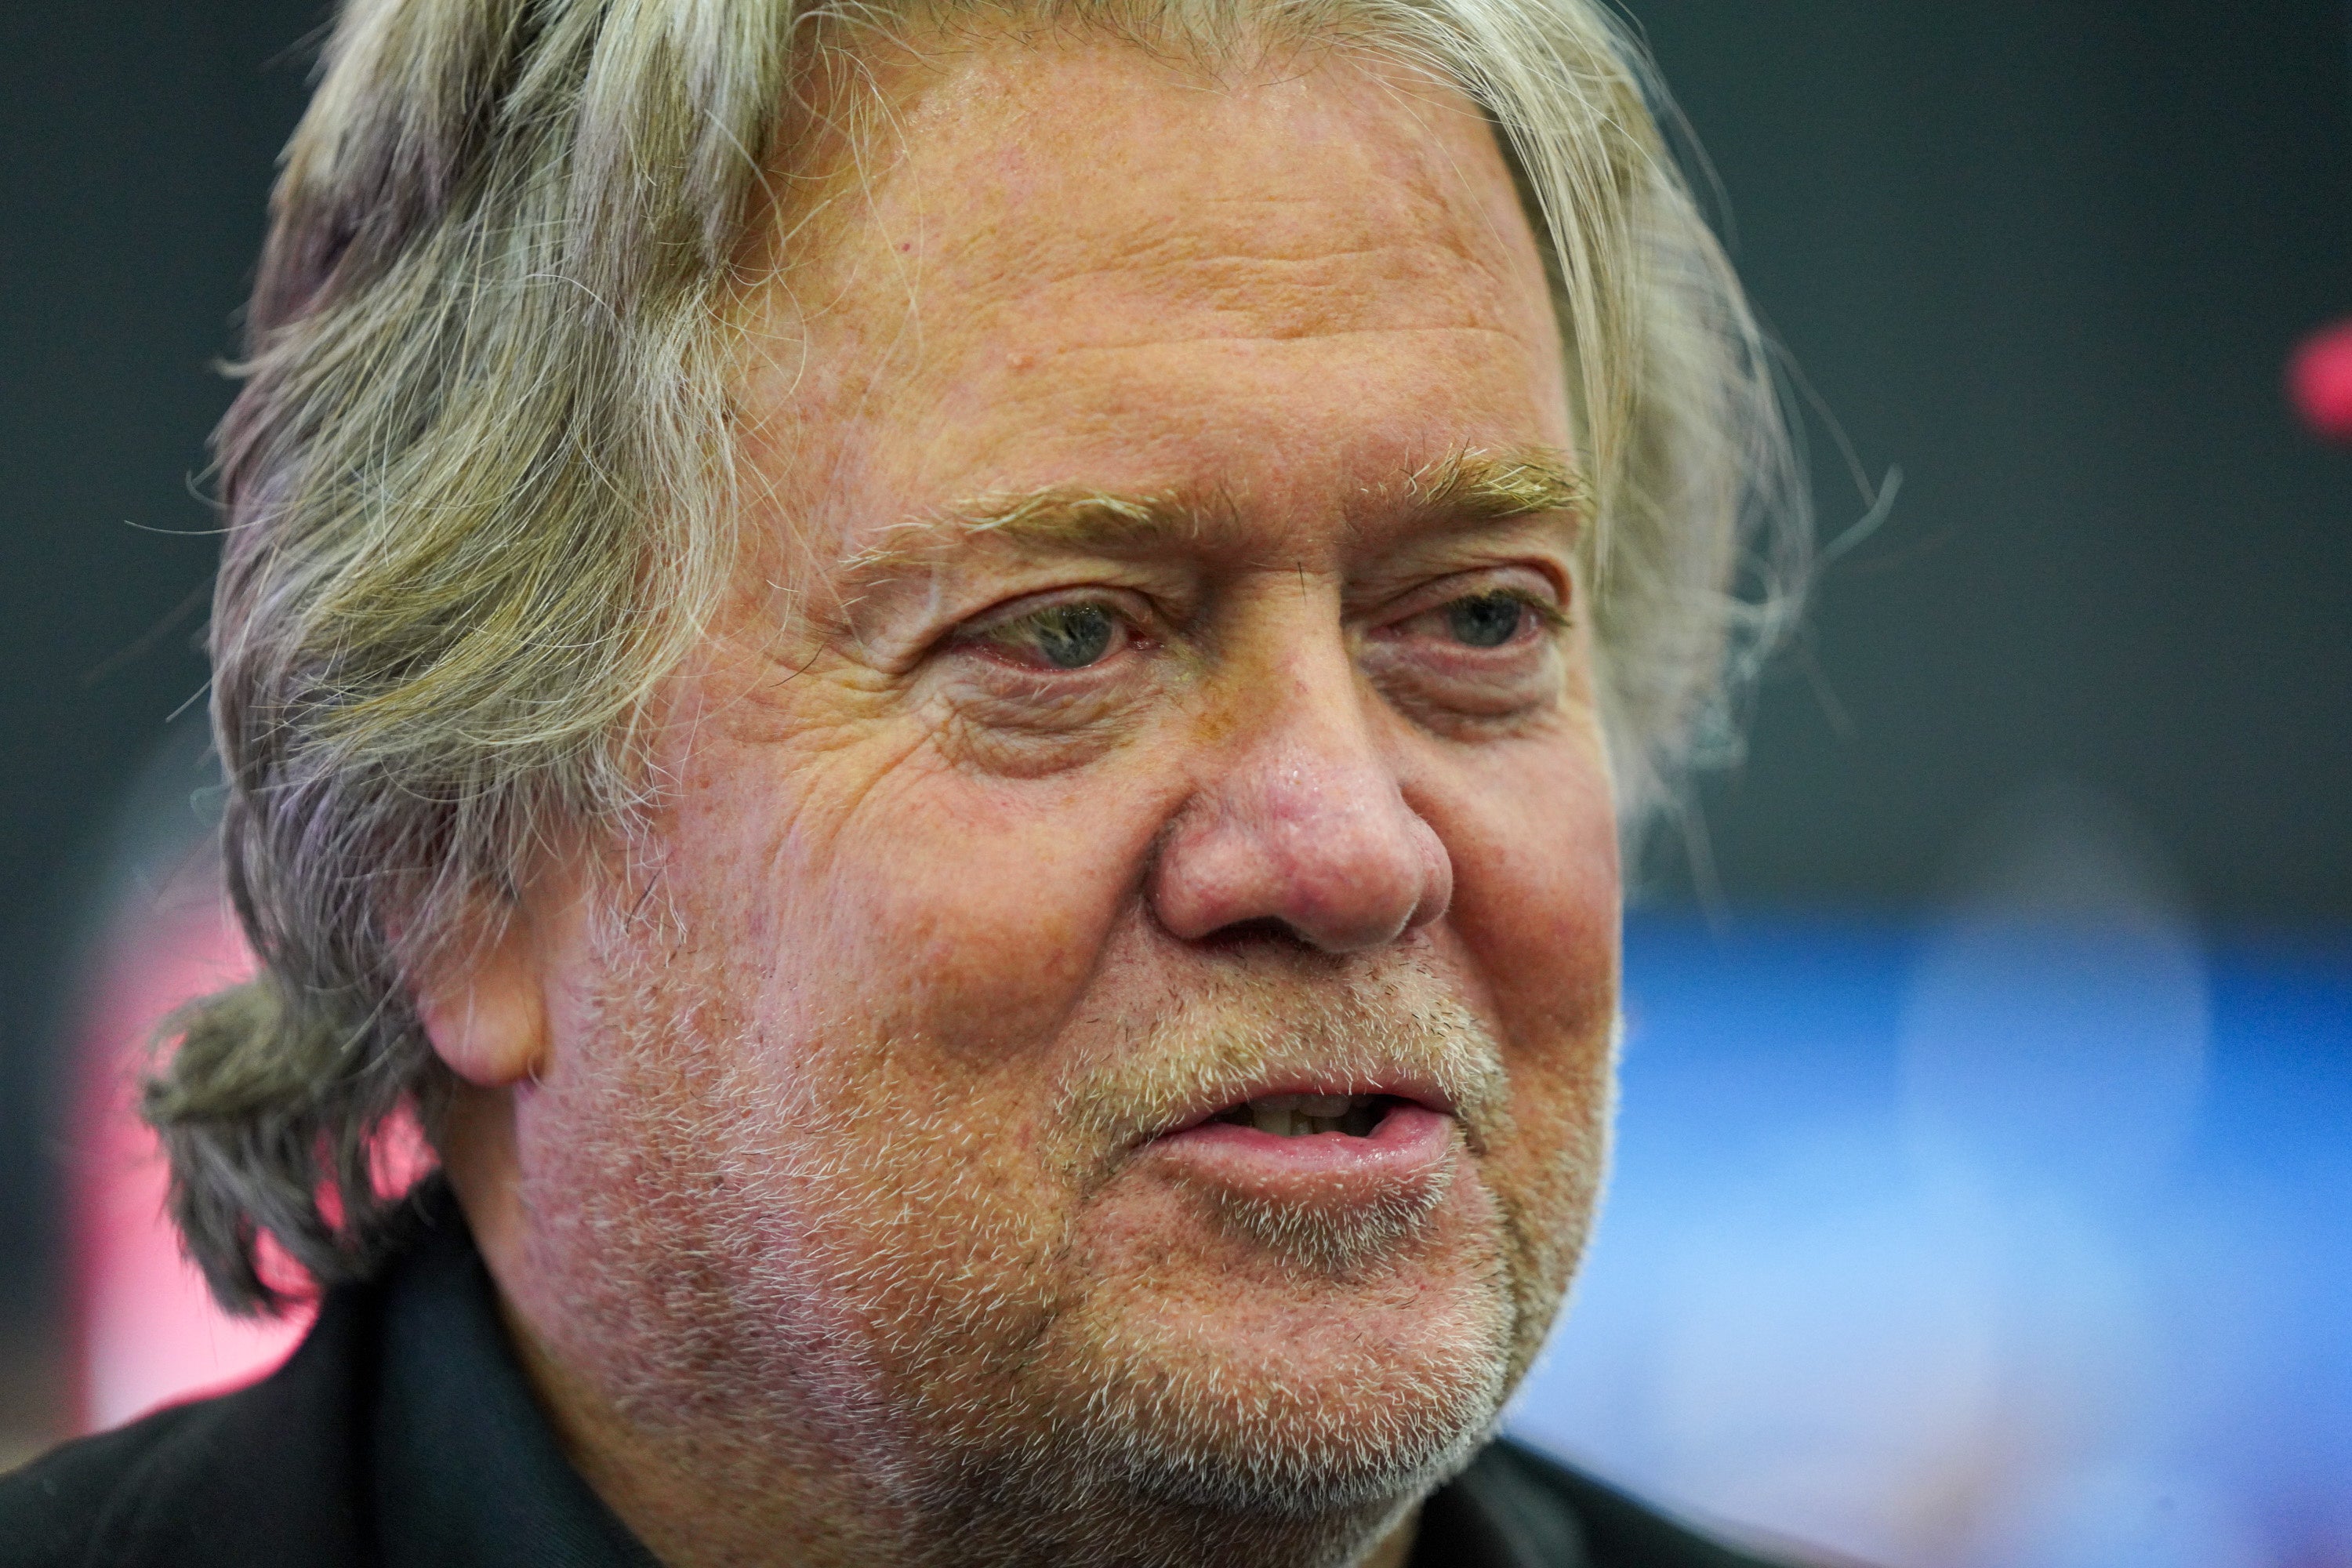 Bannon – still an influential voice in MAGA circles – must surrender to prison to begin a four-month sentence on July 1